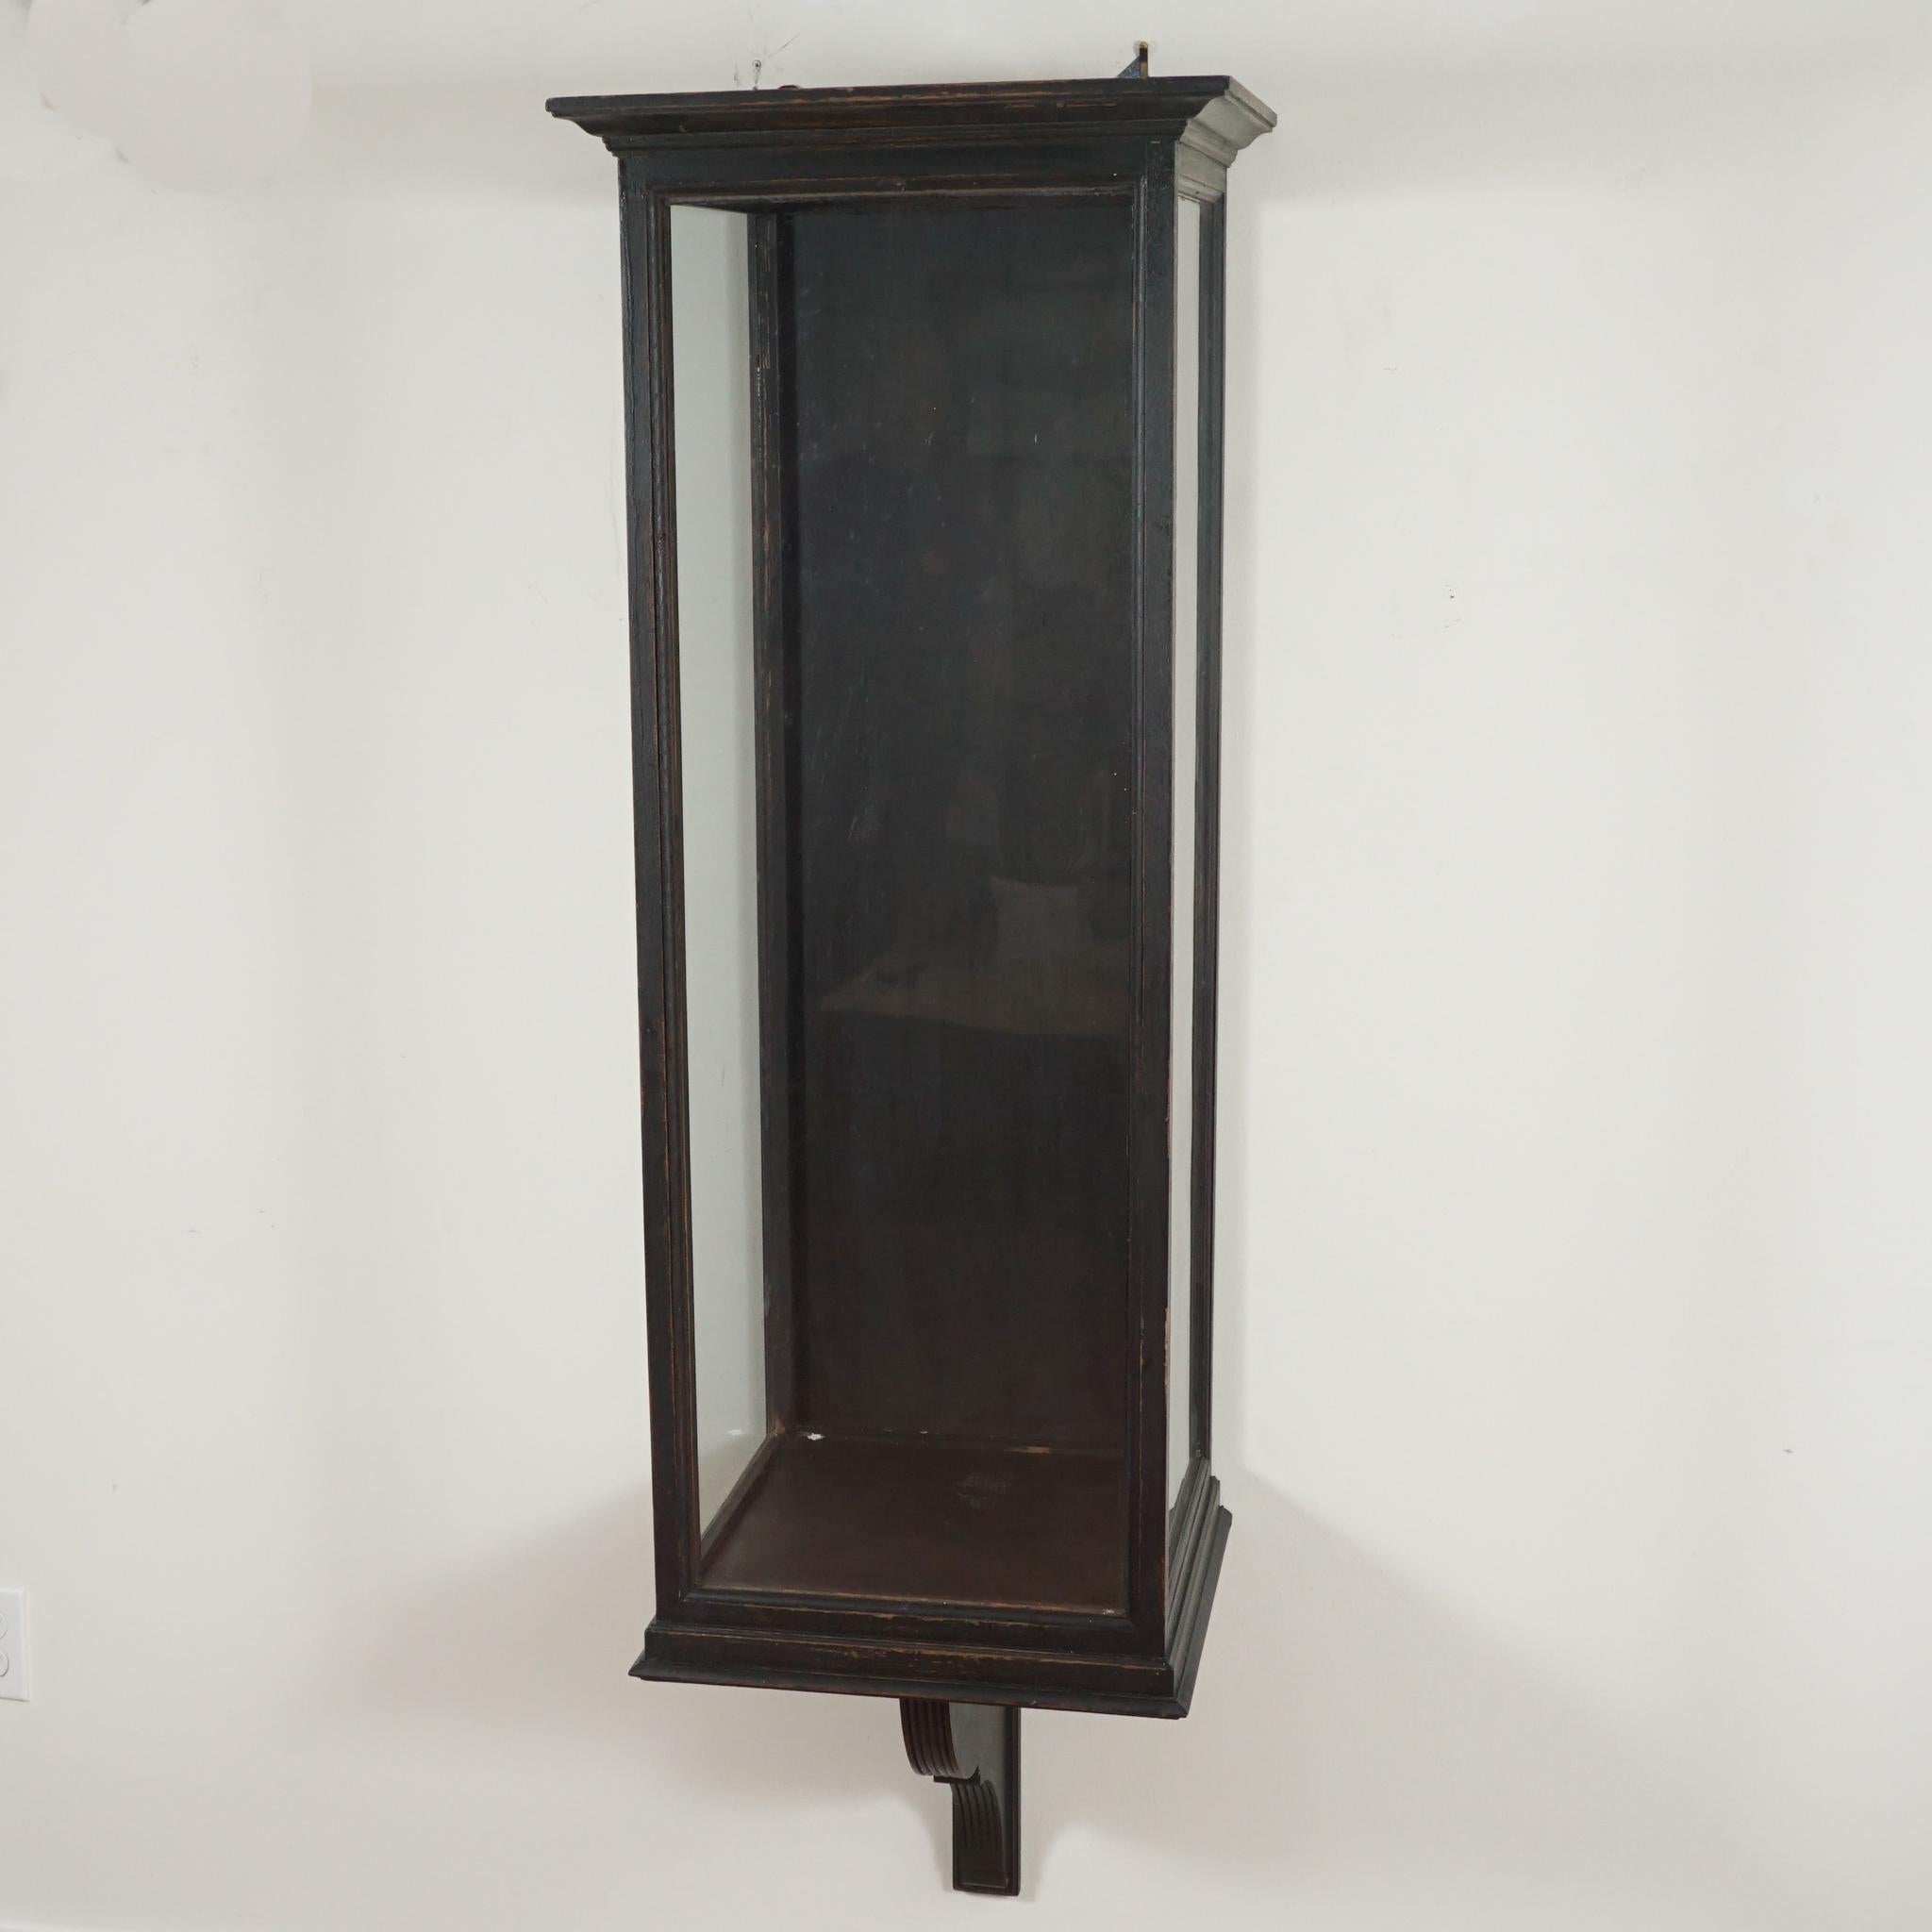 The scale and design of this 1920s wall-mounted wood vitrine is certain to add decorative interest to any interior.   Featuring a slightly distressed wood finish and seeded glass, the interior is easily accessed through the top.   One-of-a-kind from